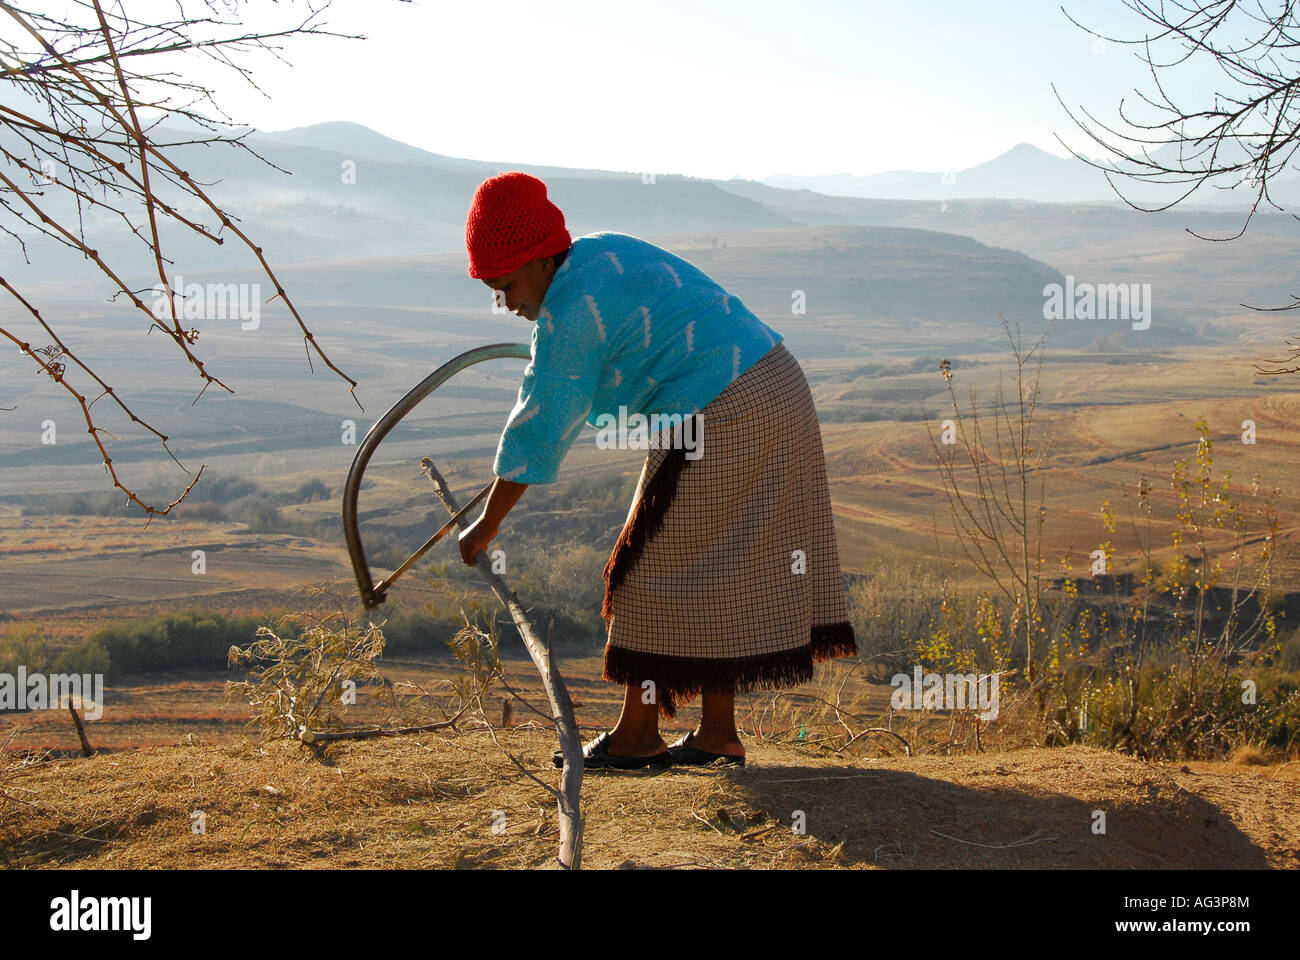 Basotho woman sawing wood for fire during bitterly cold winter weather, Lesotho, Africa Stock Photo